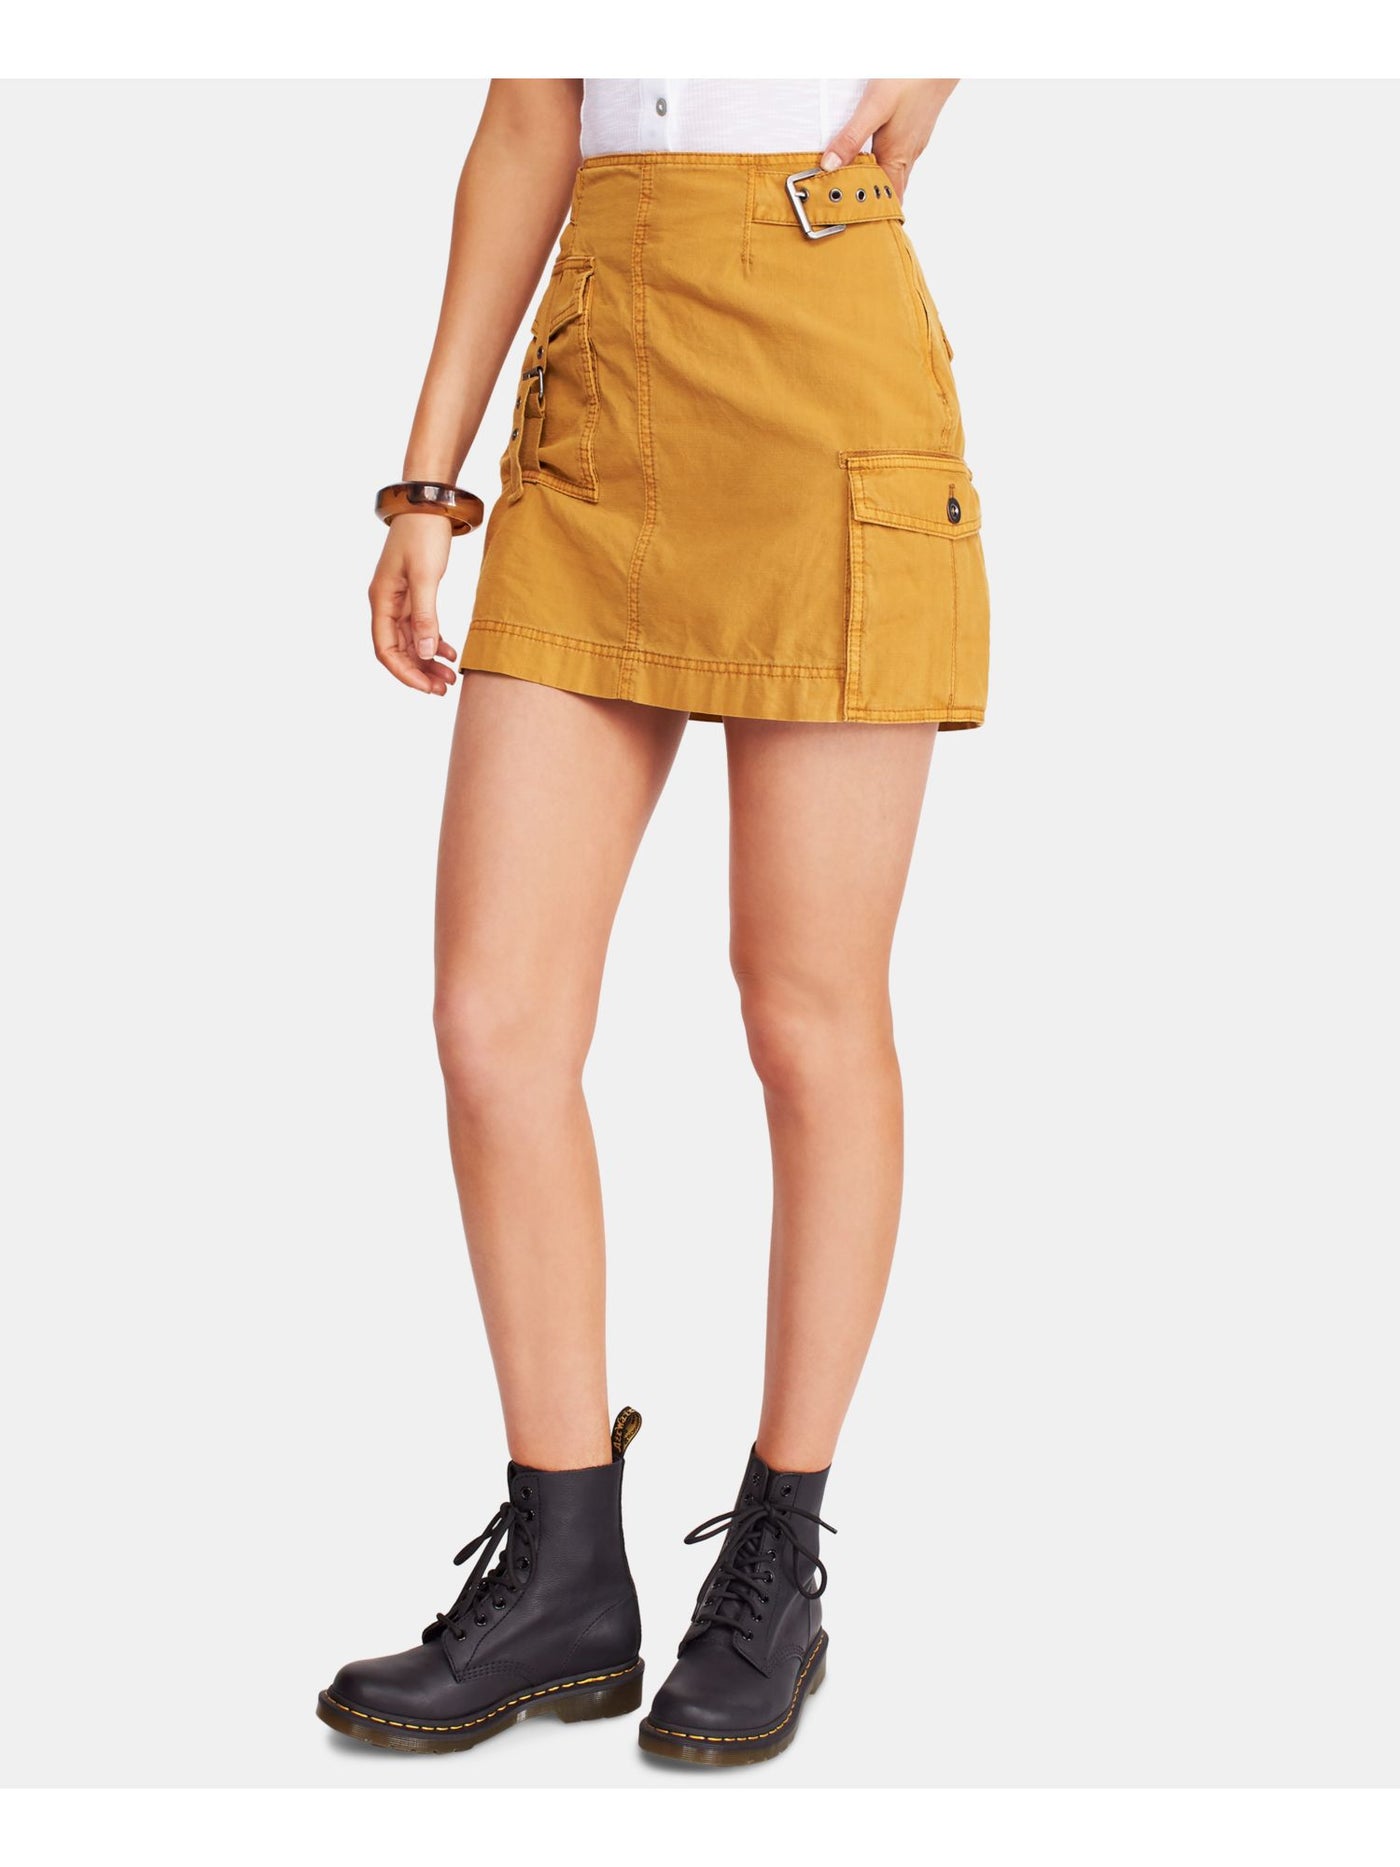 FREE PEOPLE Womens Yellow Belted Mini Pencil Skirt 2